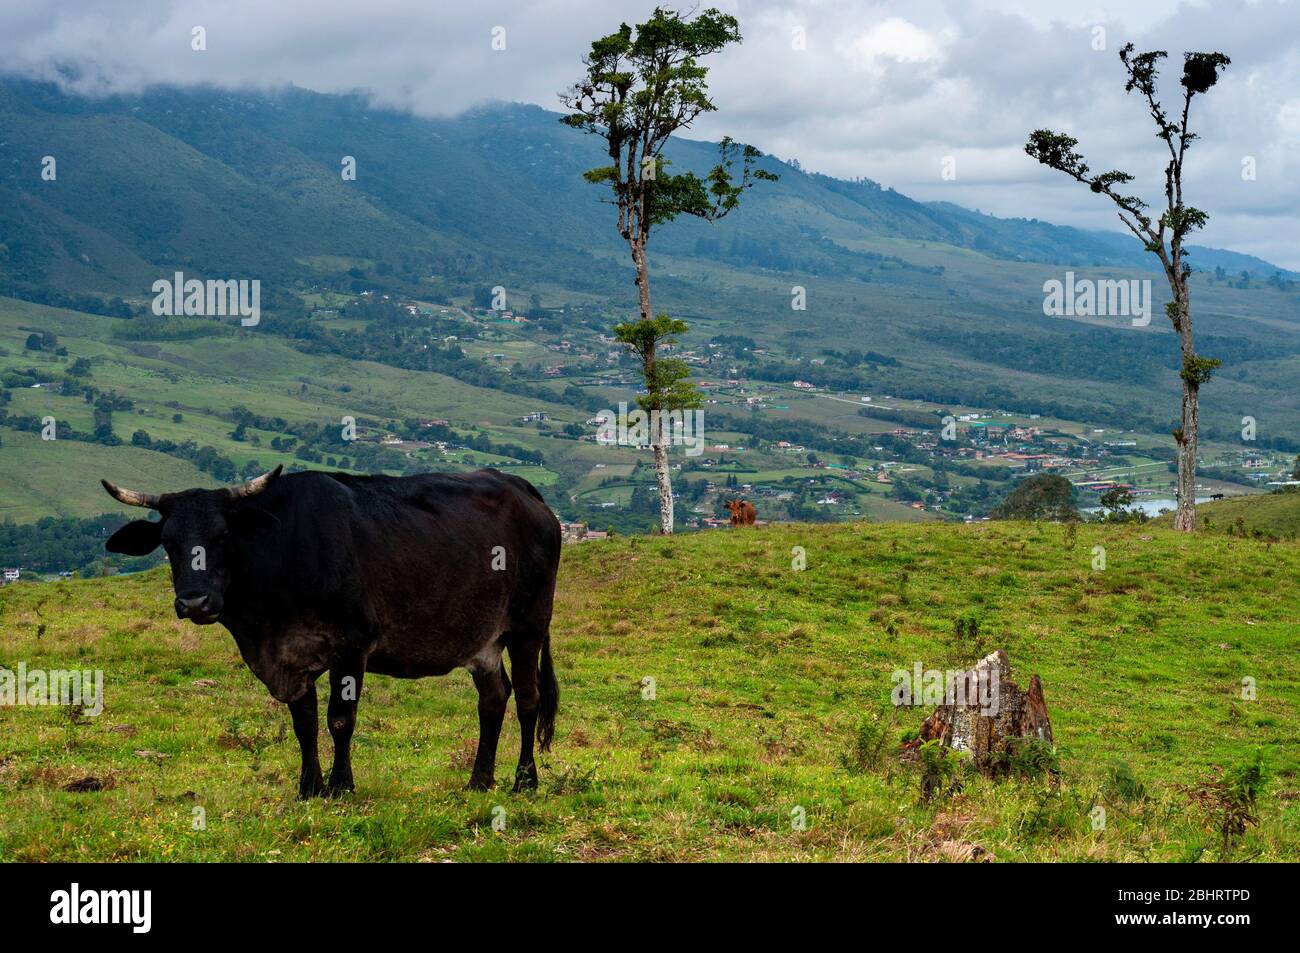 Cows in Calima Lake in Darien in the Cauca Valley, Colombia, South America.  Calima is the largest artificial lake in Colombia with an area of 70 km2. Stock Photo